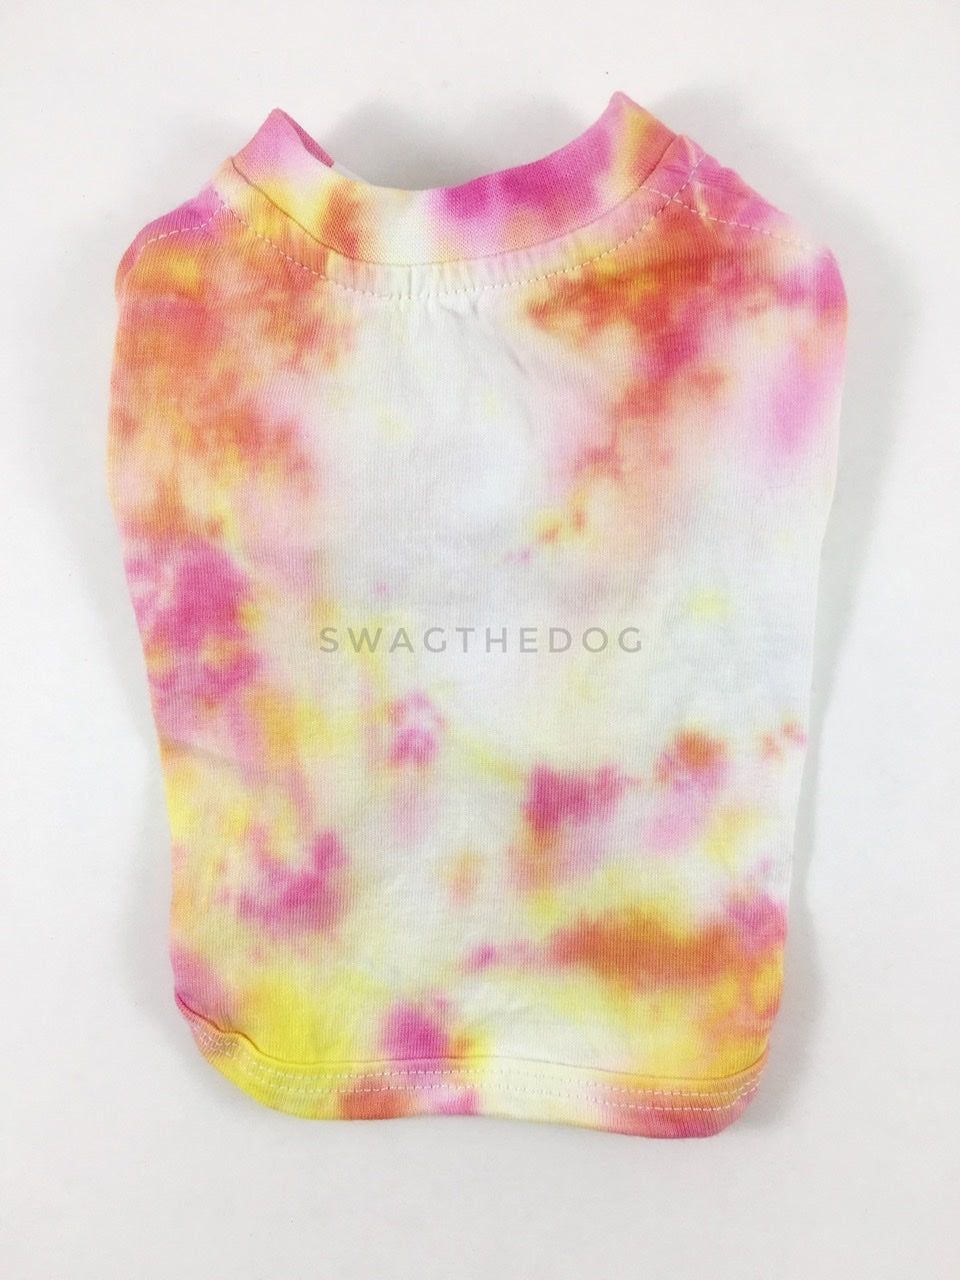 Swagadelic Cotton Candy Tie Dye Tee - Product back view. The hand tie-dyed tee with Pink and Yellow